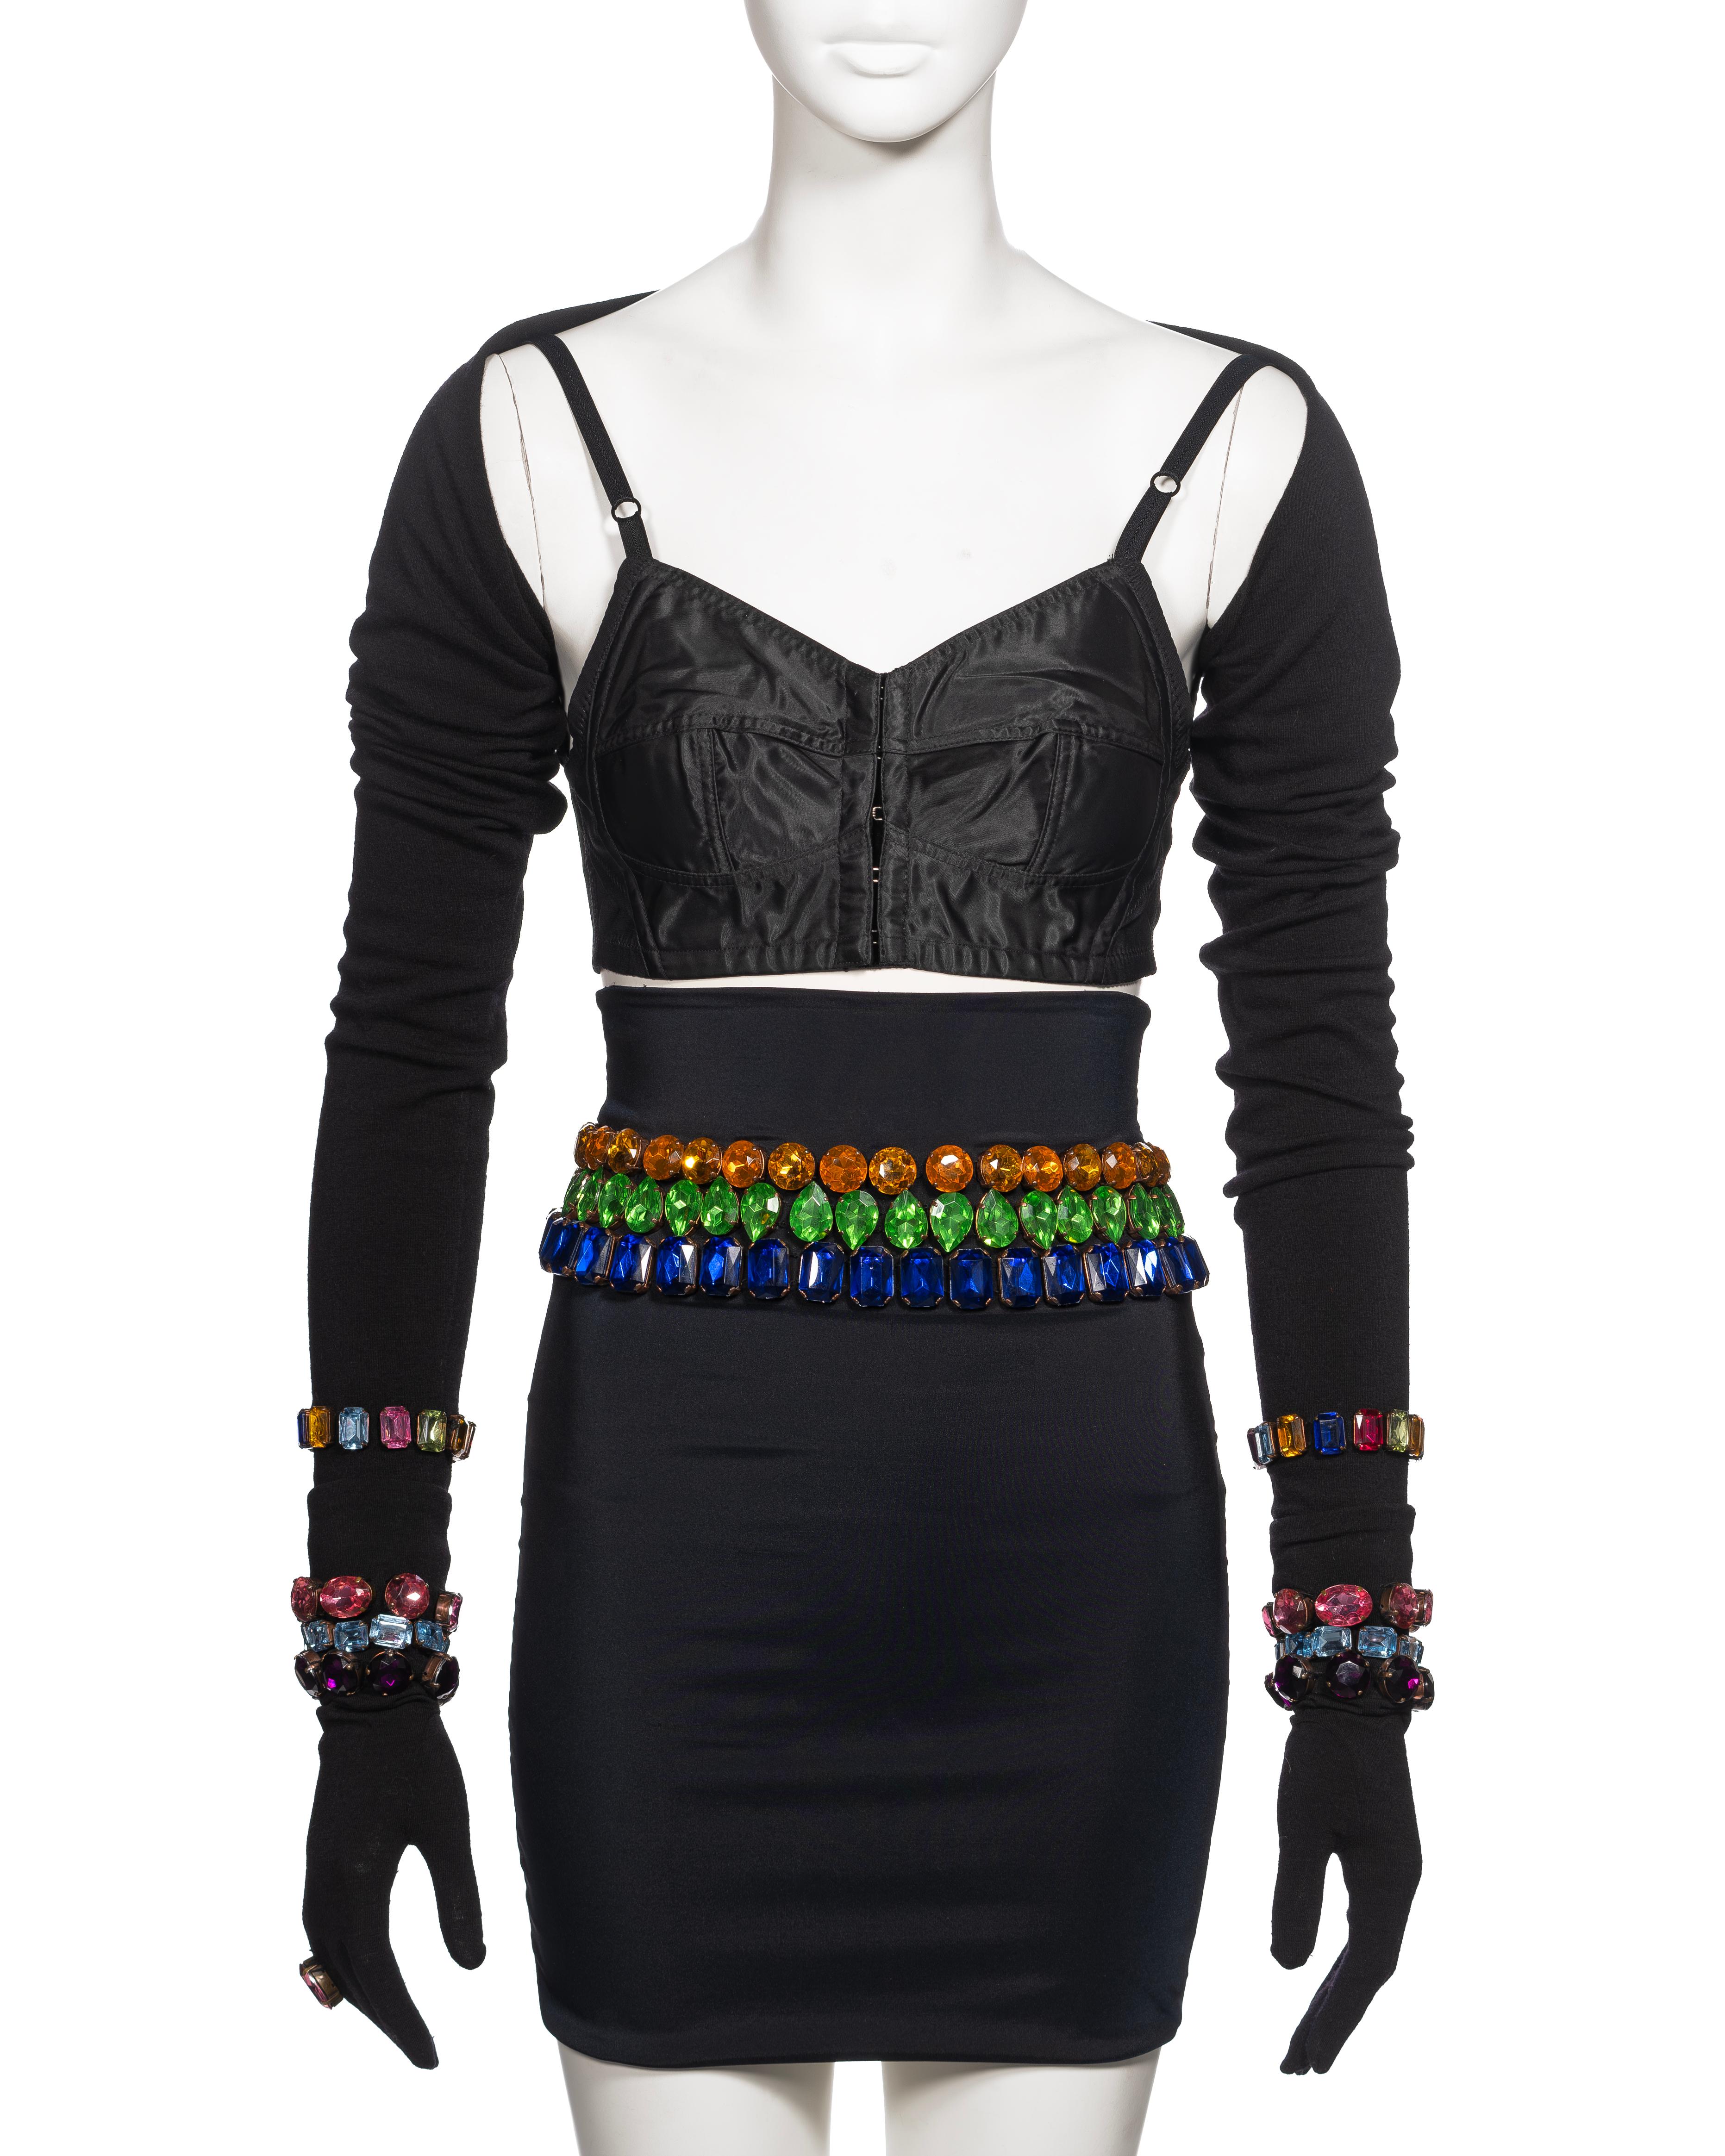 Dolce & Gabbana Black Crystal Adorned Corset, Skirt, Shrug and Gloves, FW 1991 In Good Condition For Sale In London, GB